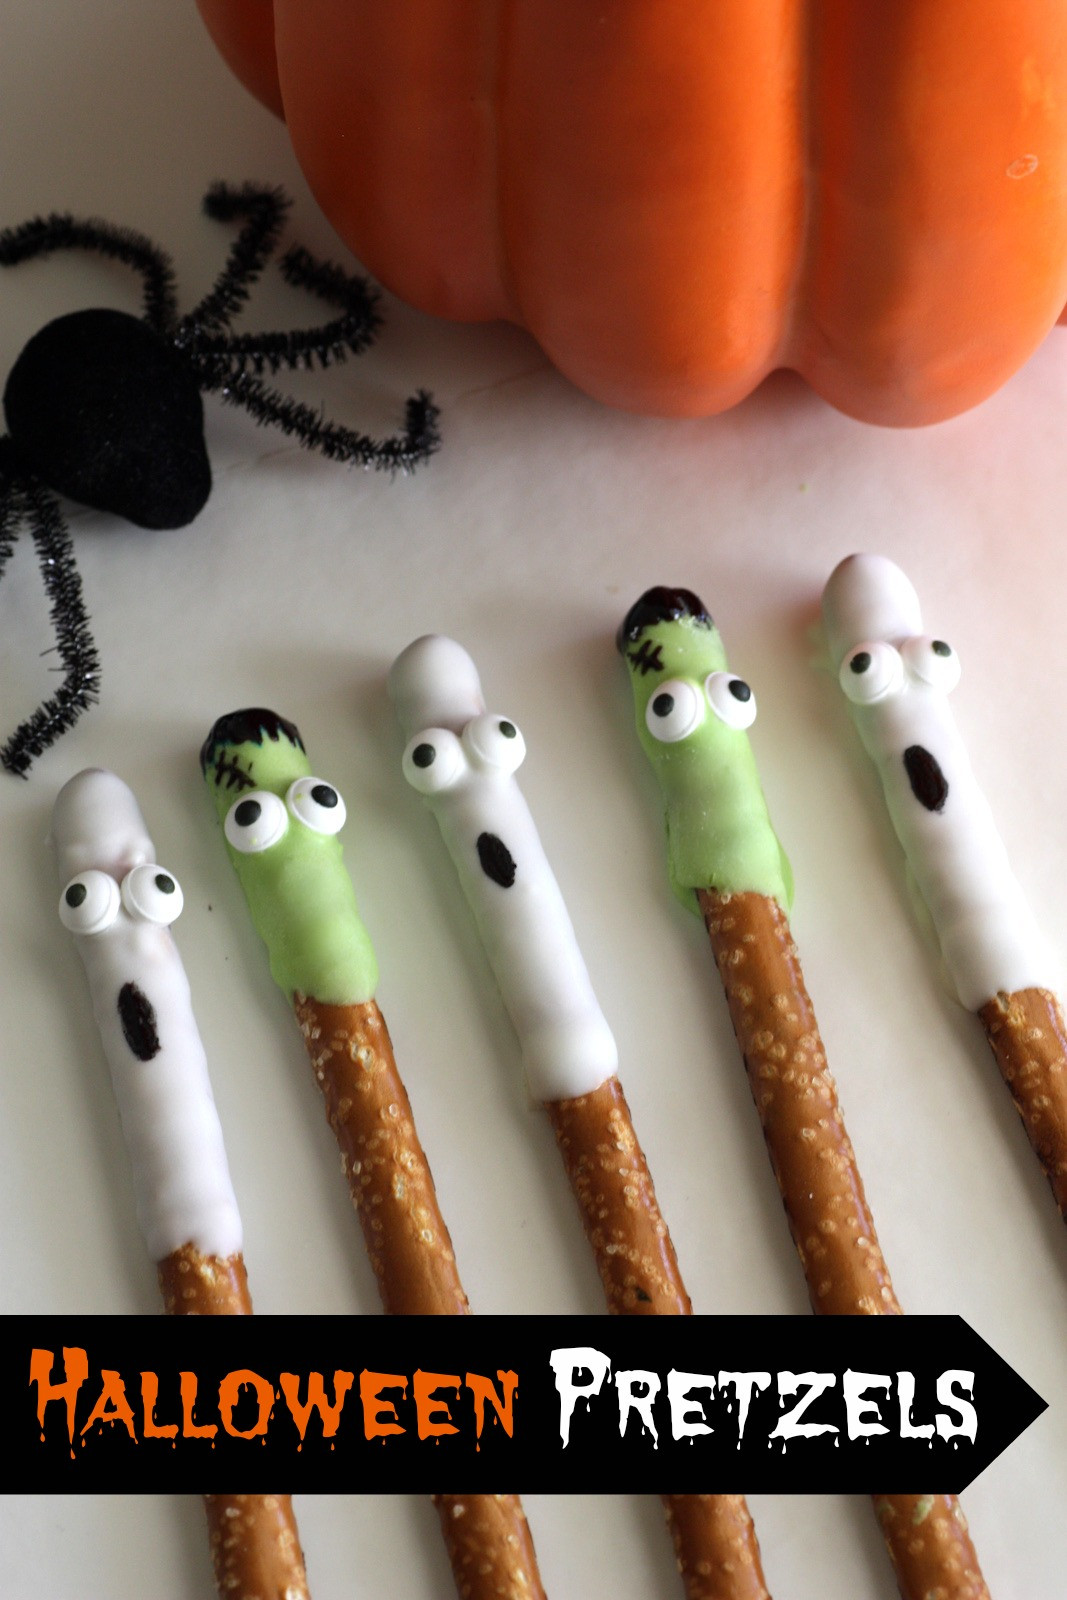 Chocolate Dipped Pretzels For Halloween
 Halloween White Chocolate Covered Pretzels